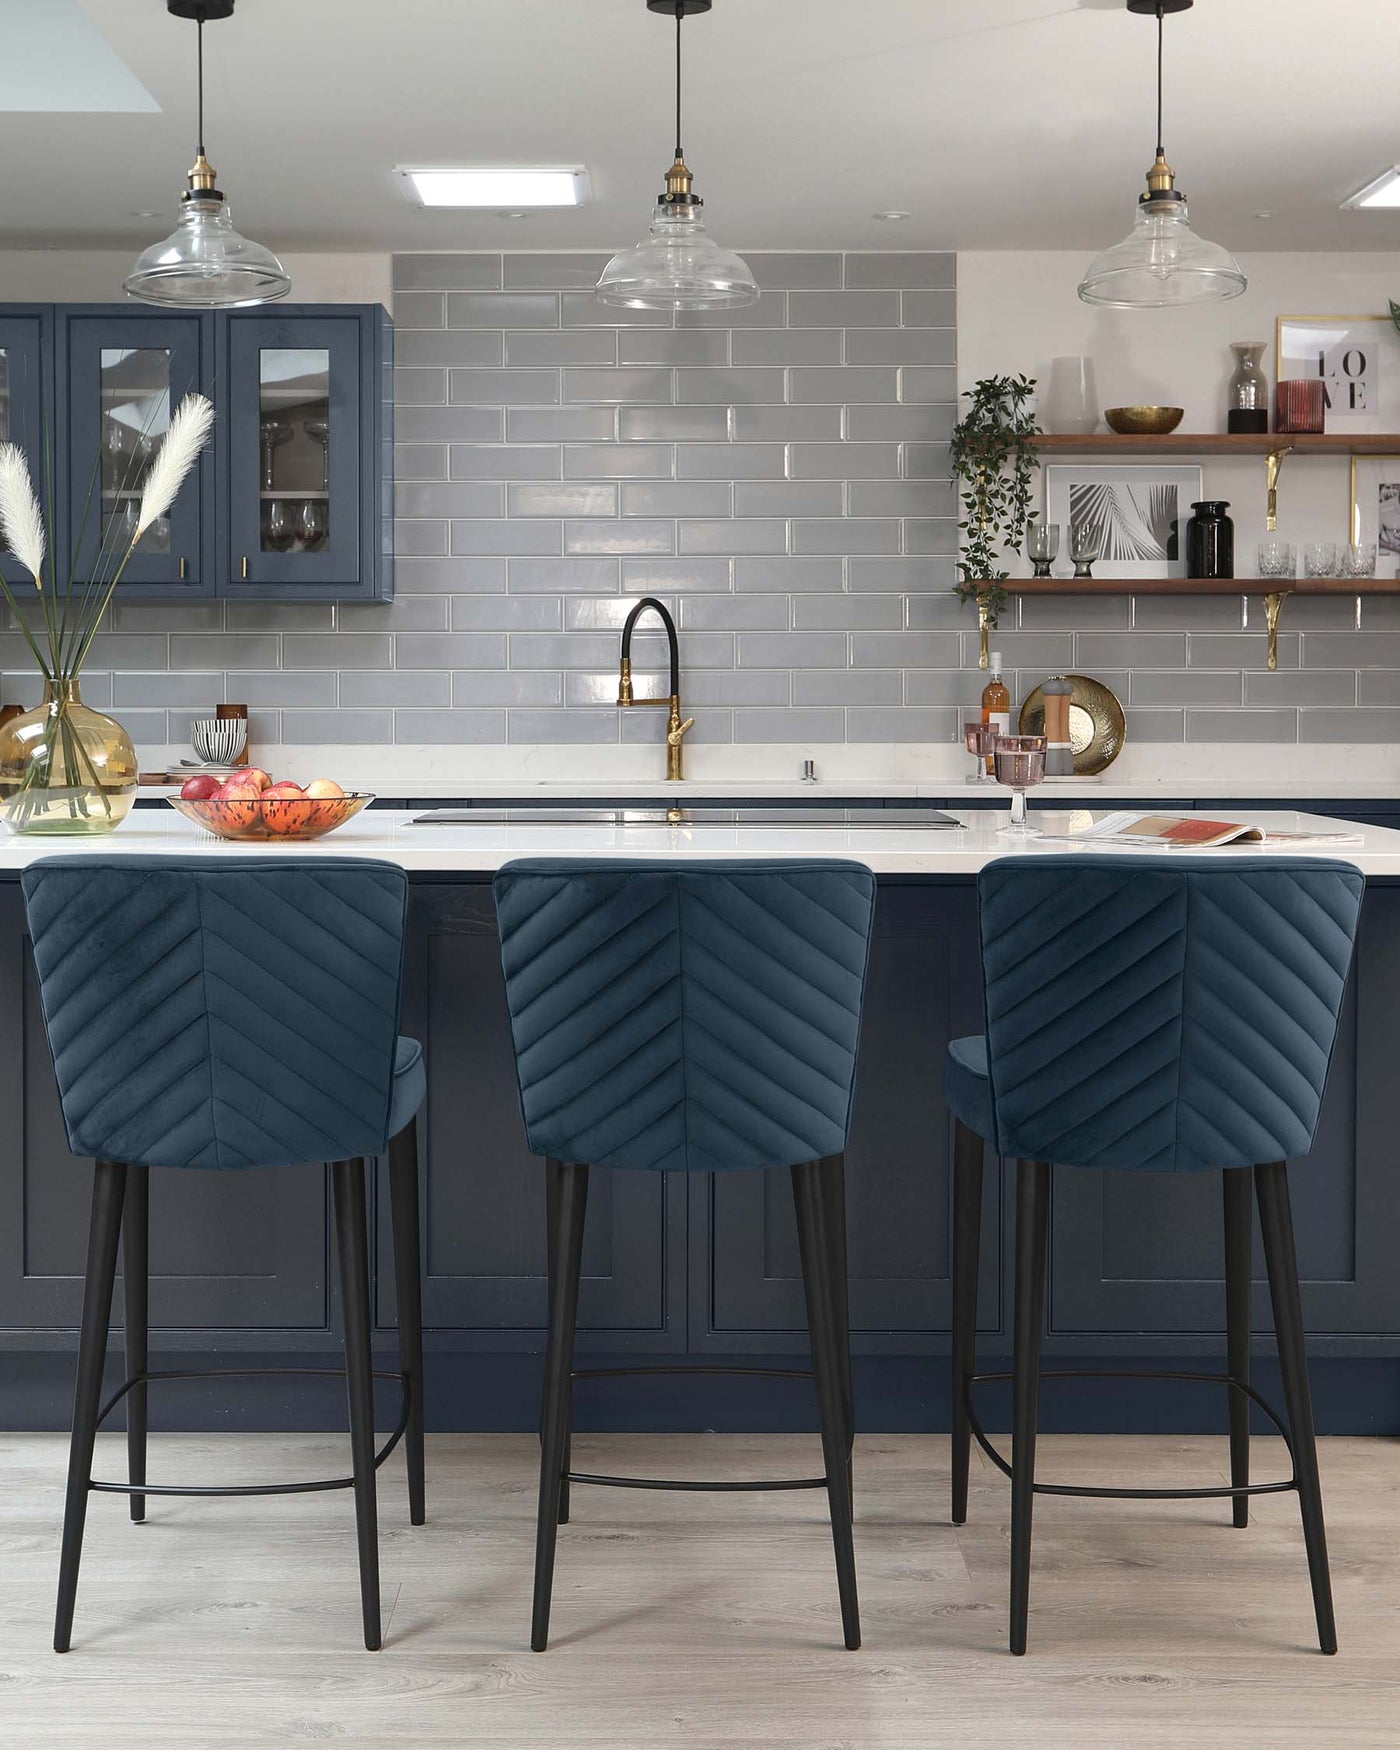 Elegant modern kitchen bar stools with plush, quilted navy-blue upholstery and sleek black legs.